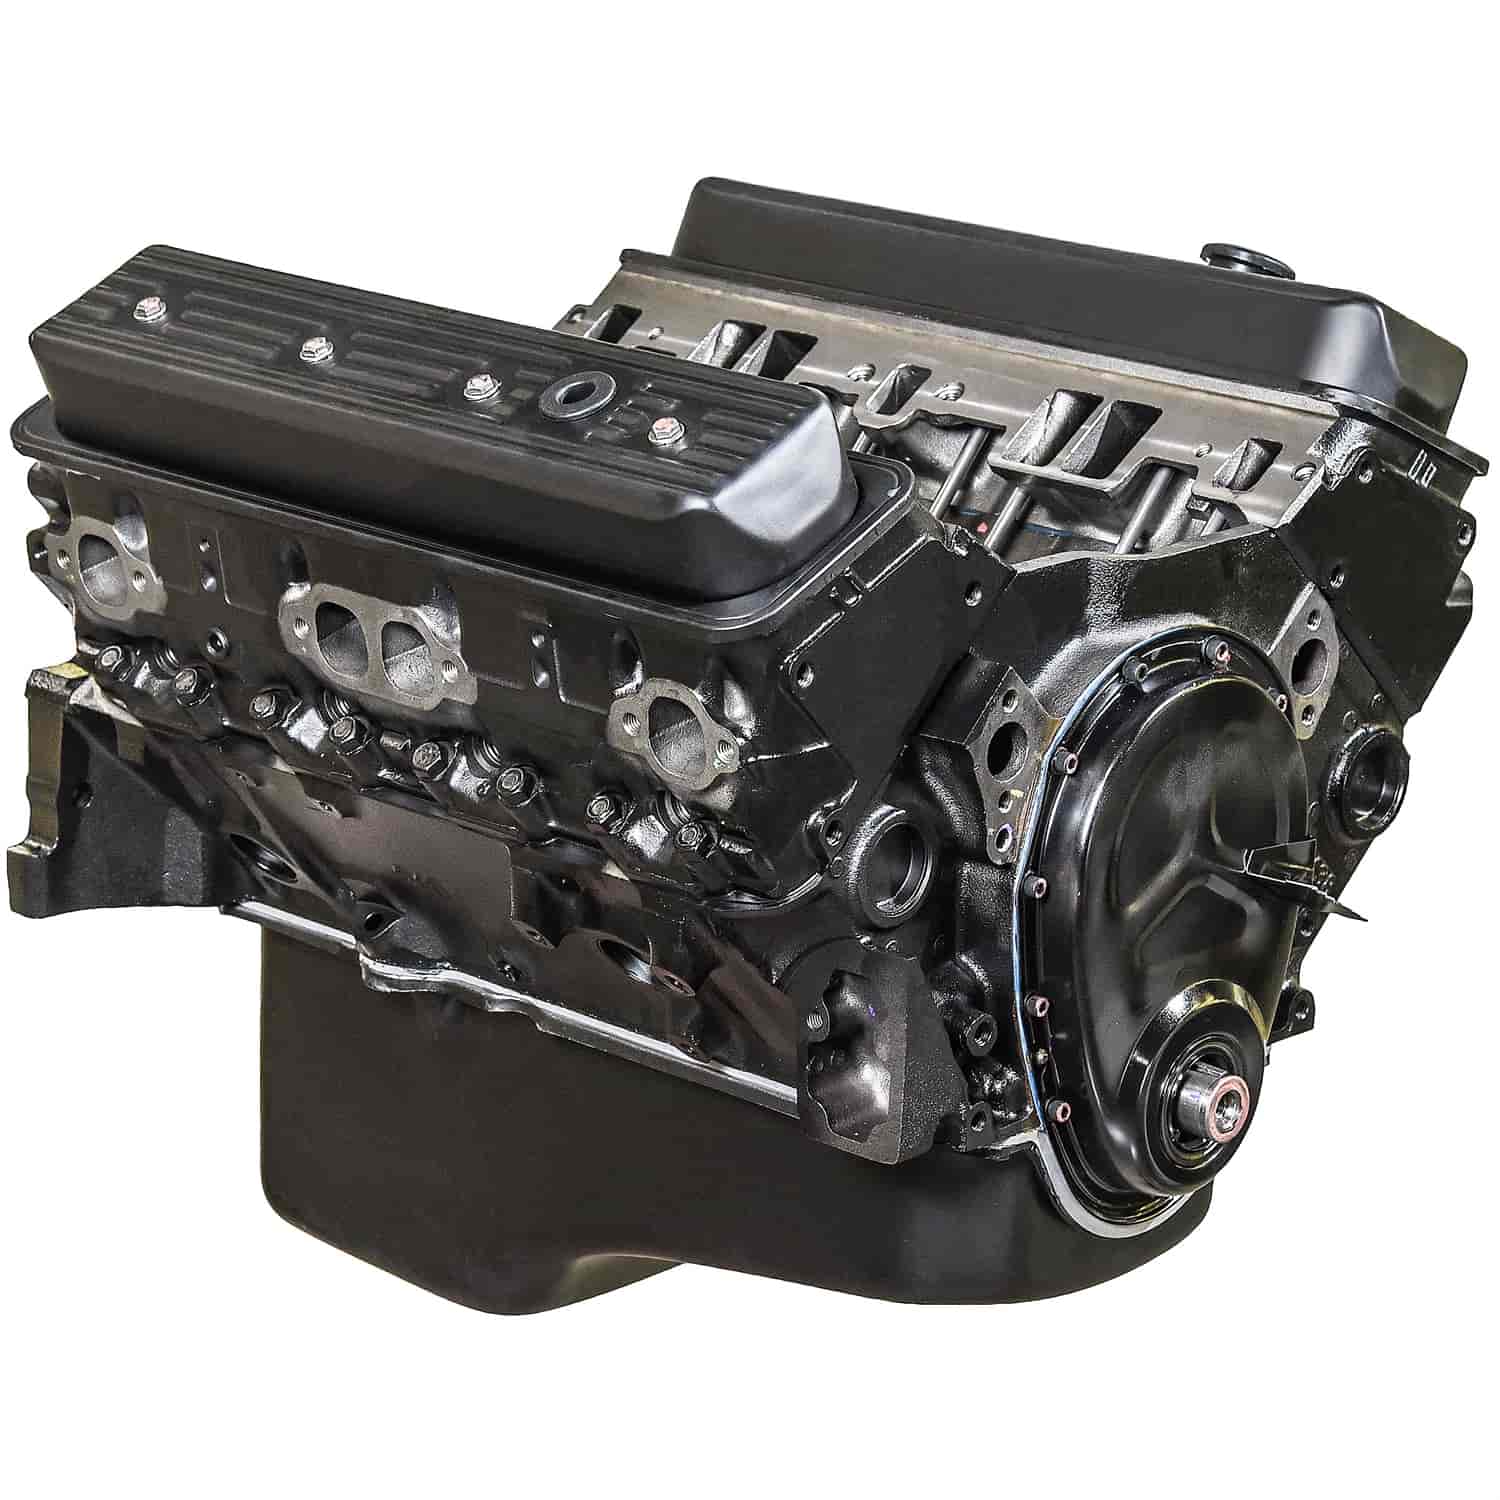 Replacement Chevy TBI 350 ci 5.7L Crate Engine